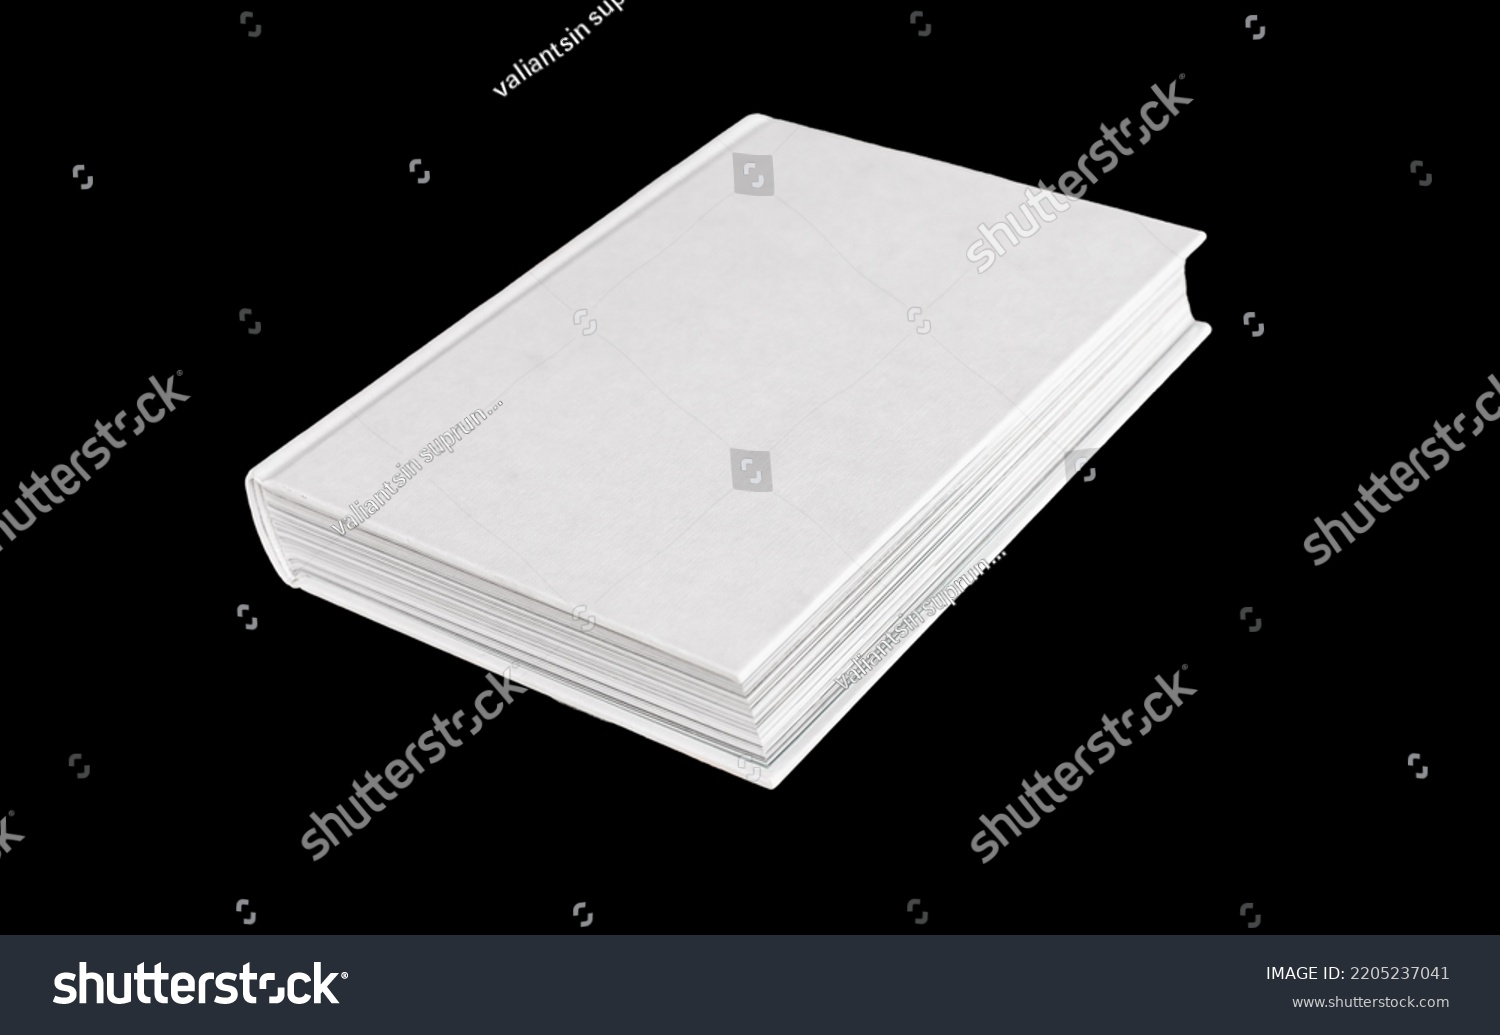 Book mockup with white empty cover isolated on black background. Angle view. Reading, study, education concept. Encyclopedia, Bible, code, novel. High quality photo #2205237041